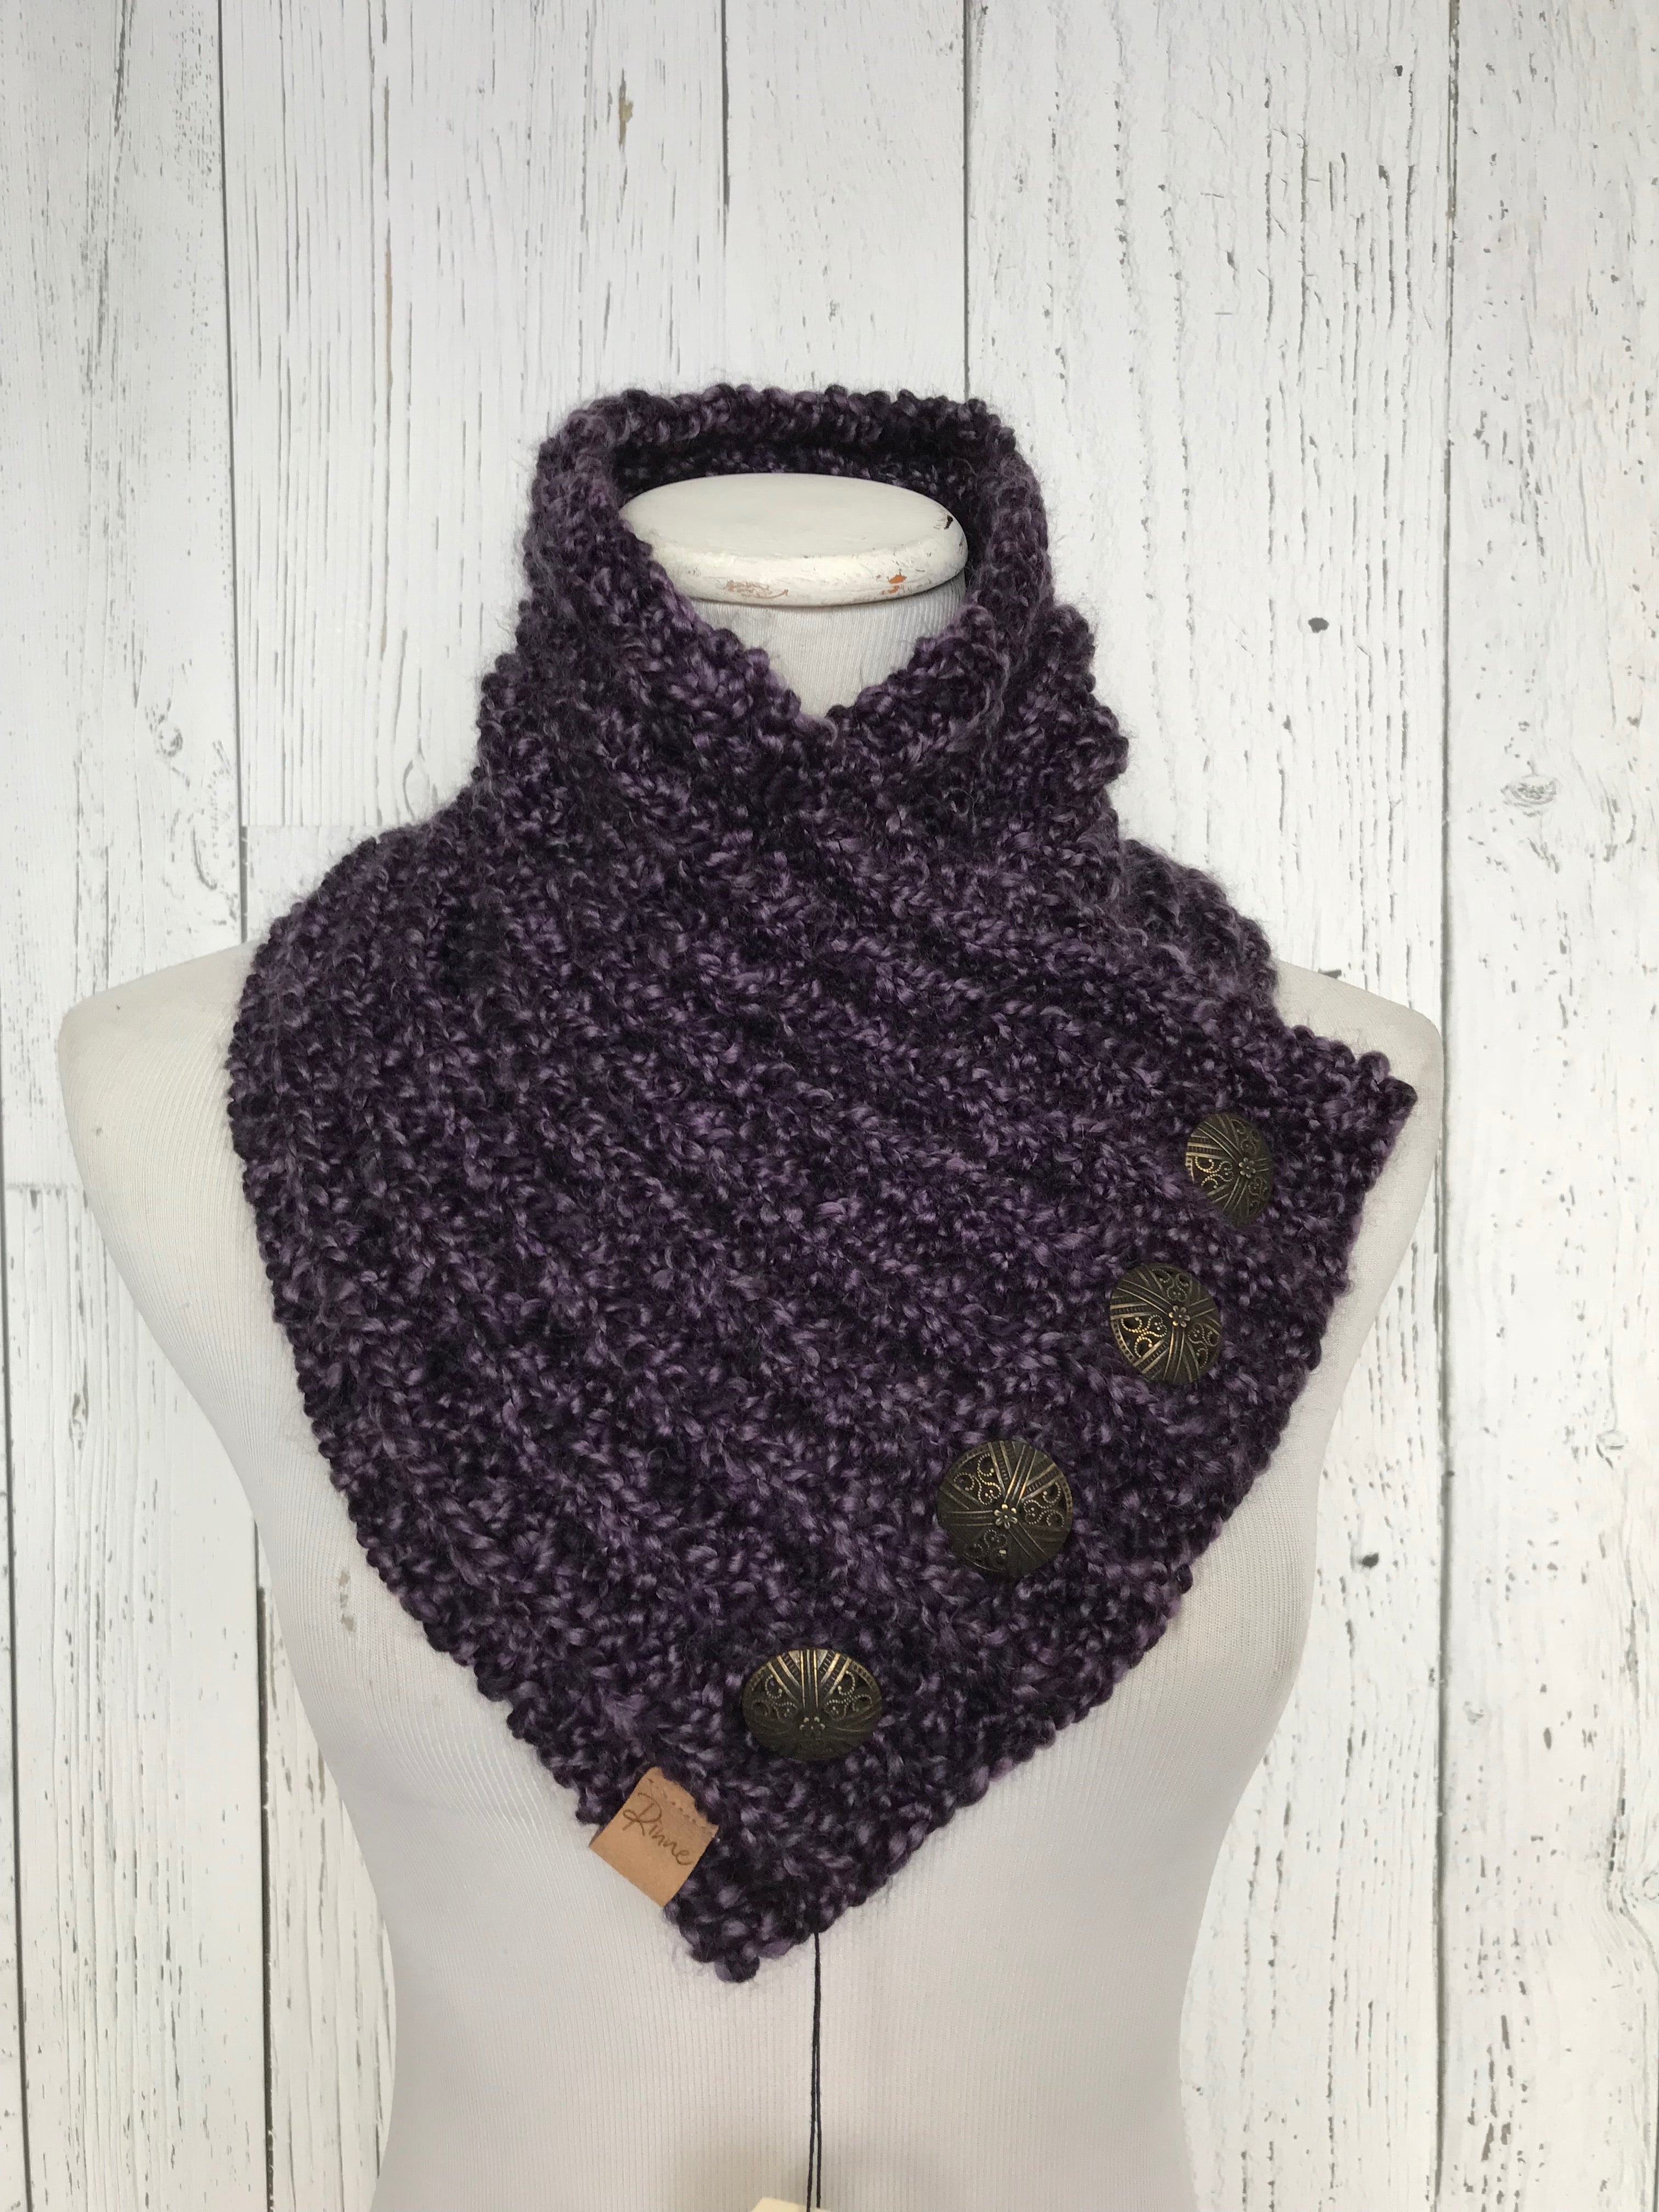 Classic Knit Button Cowl in violet purple with bronze buttons